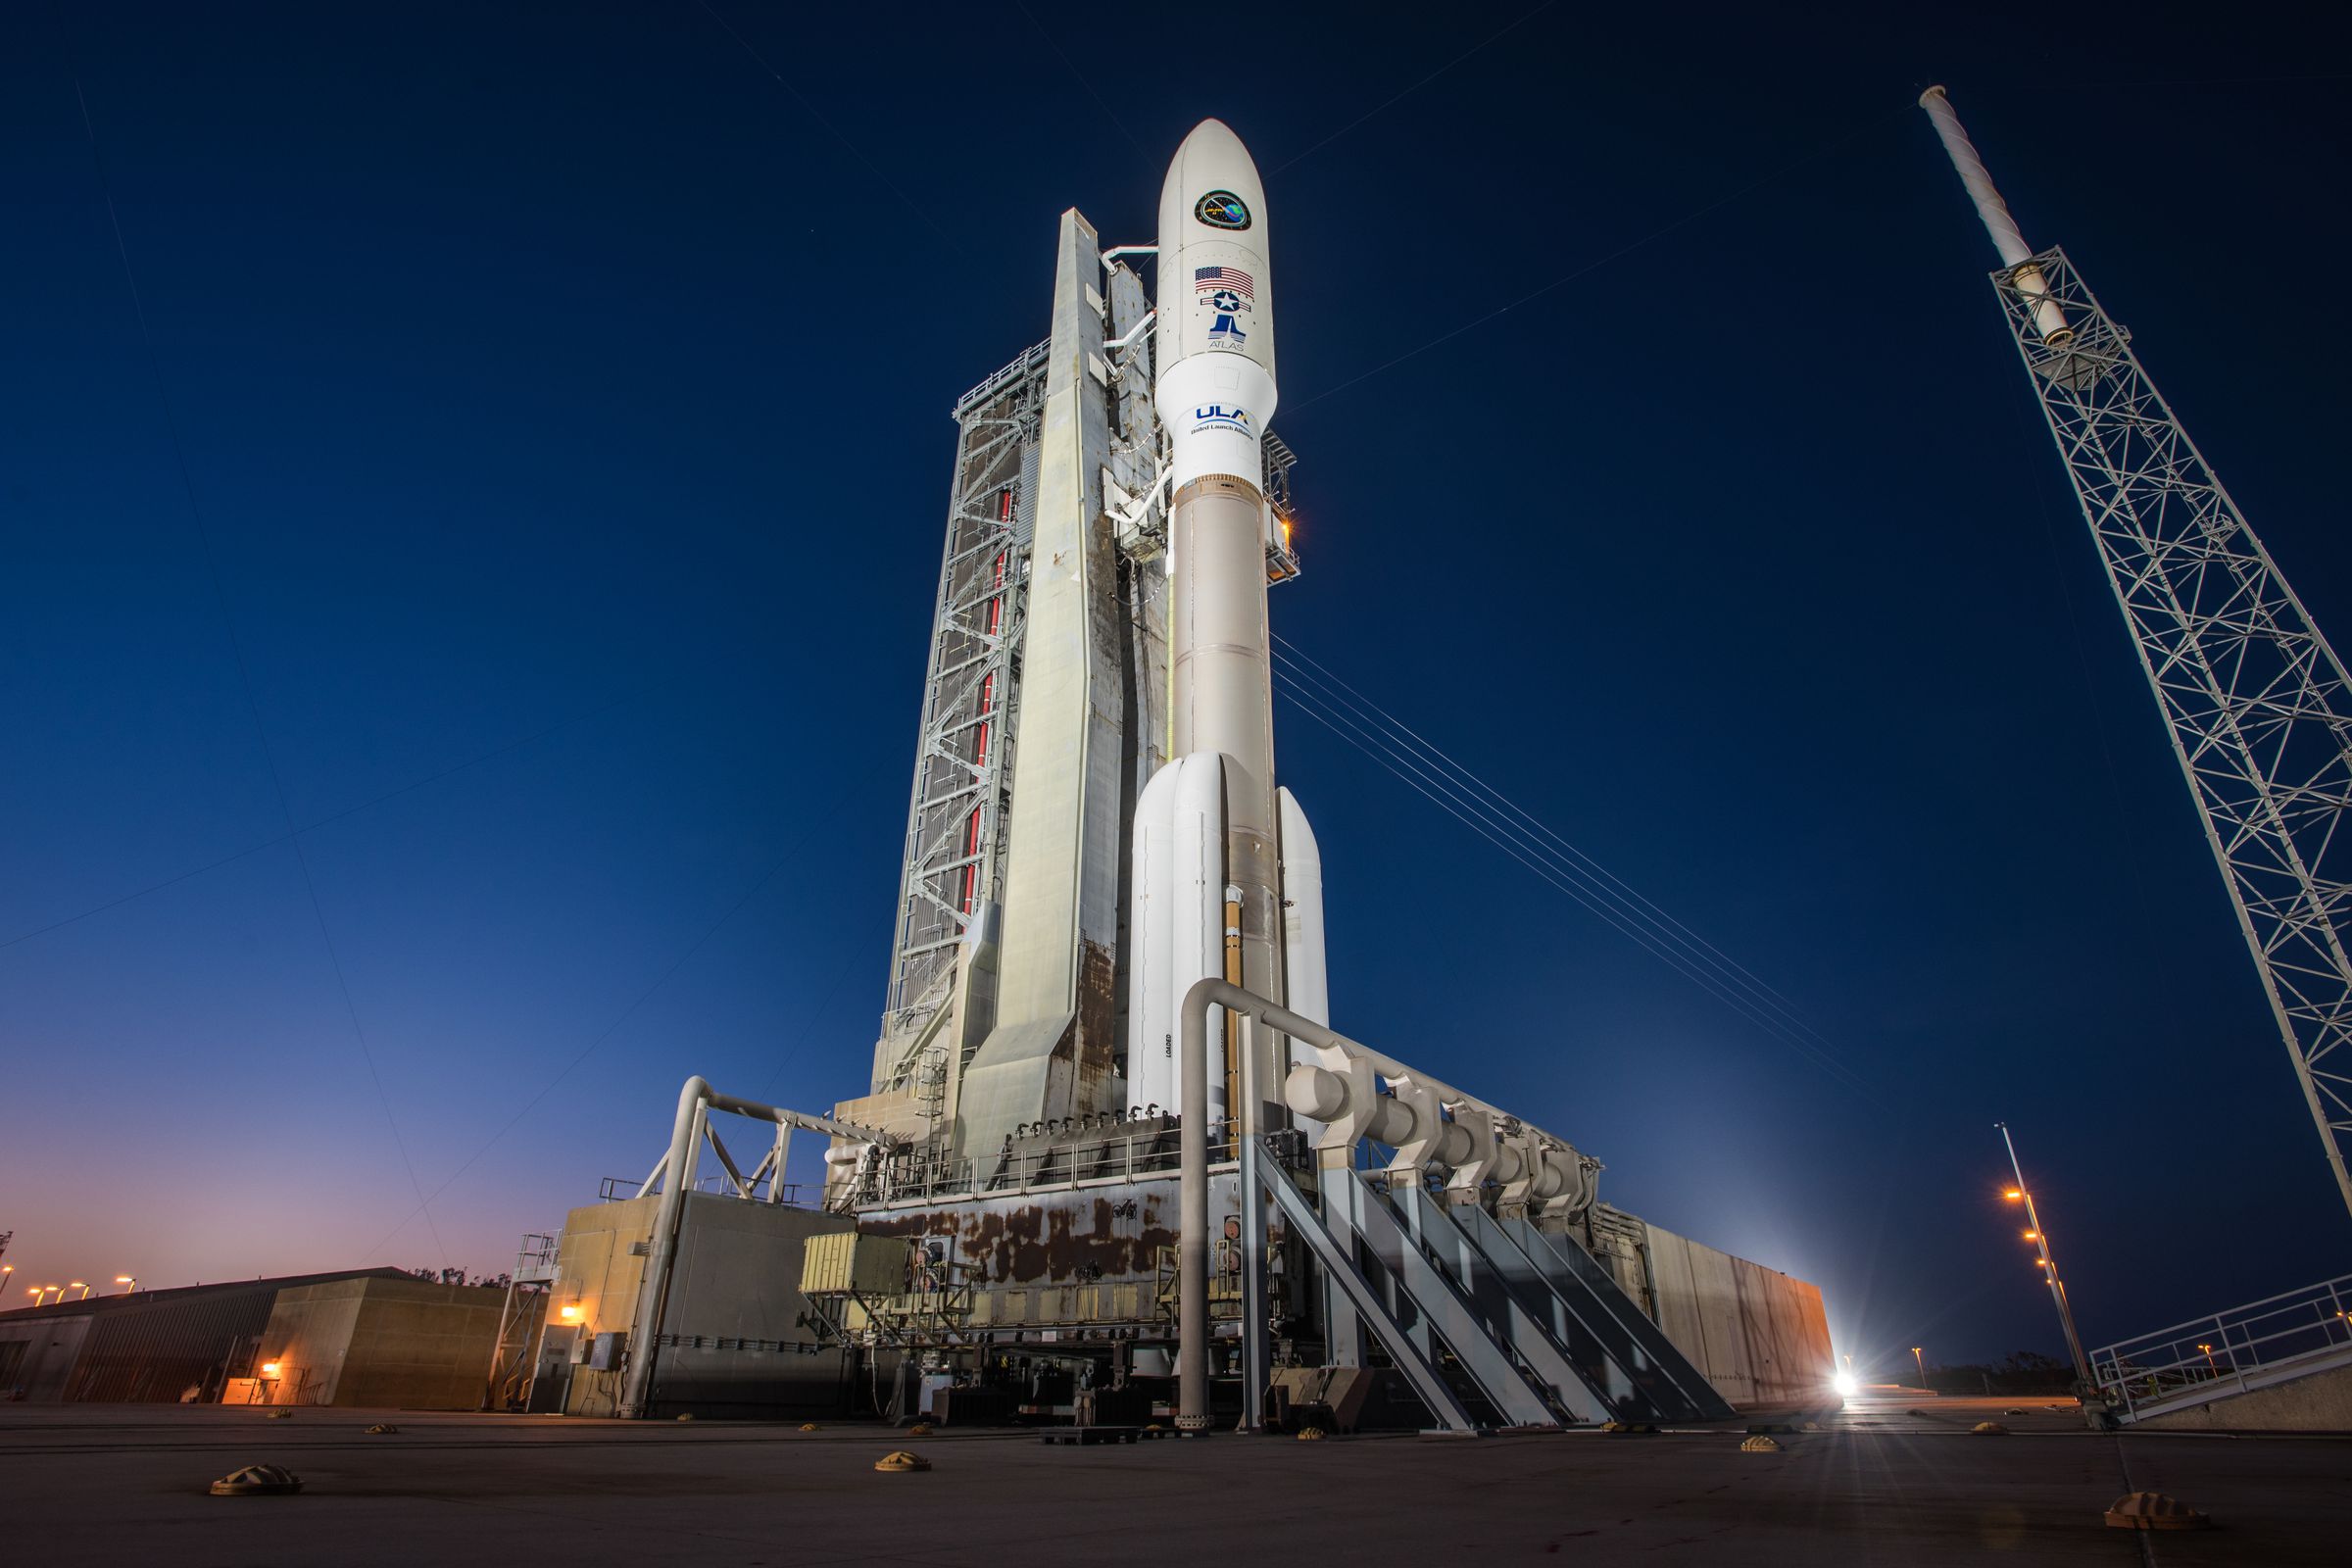 An Atlas V rocket poised to launch a satellite for the Air Force